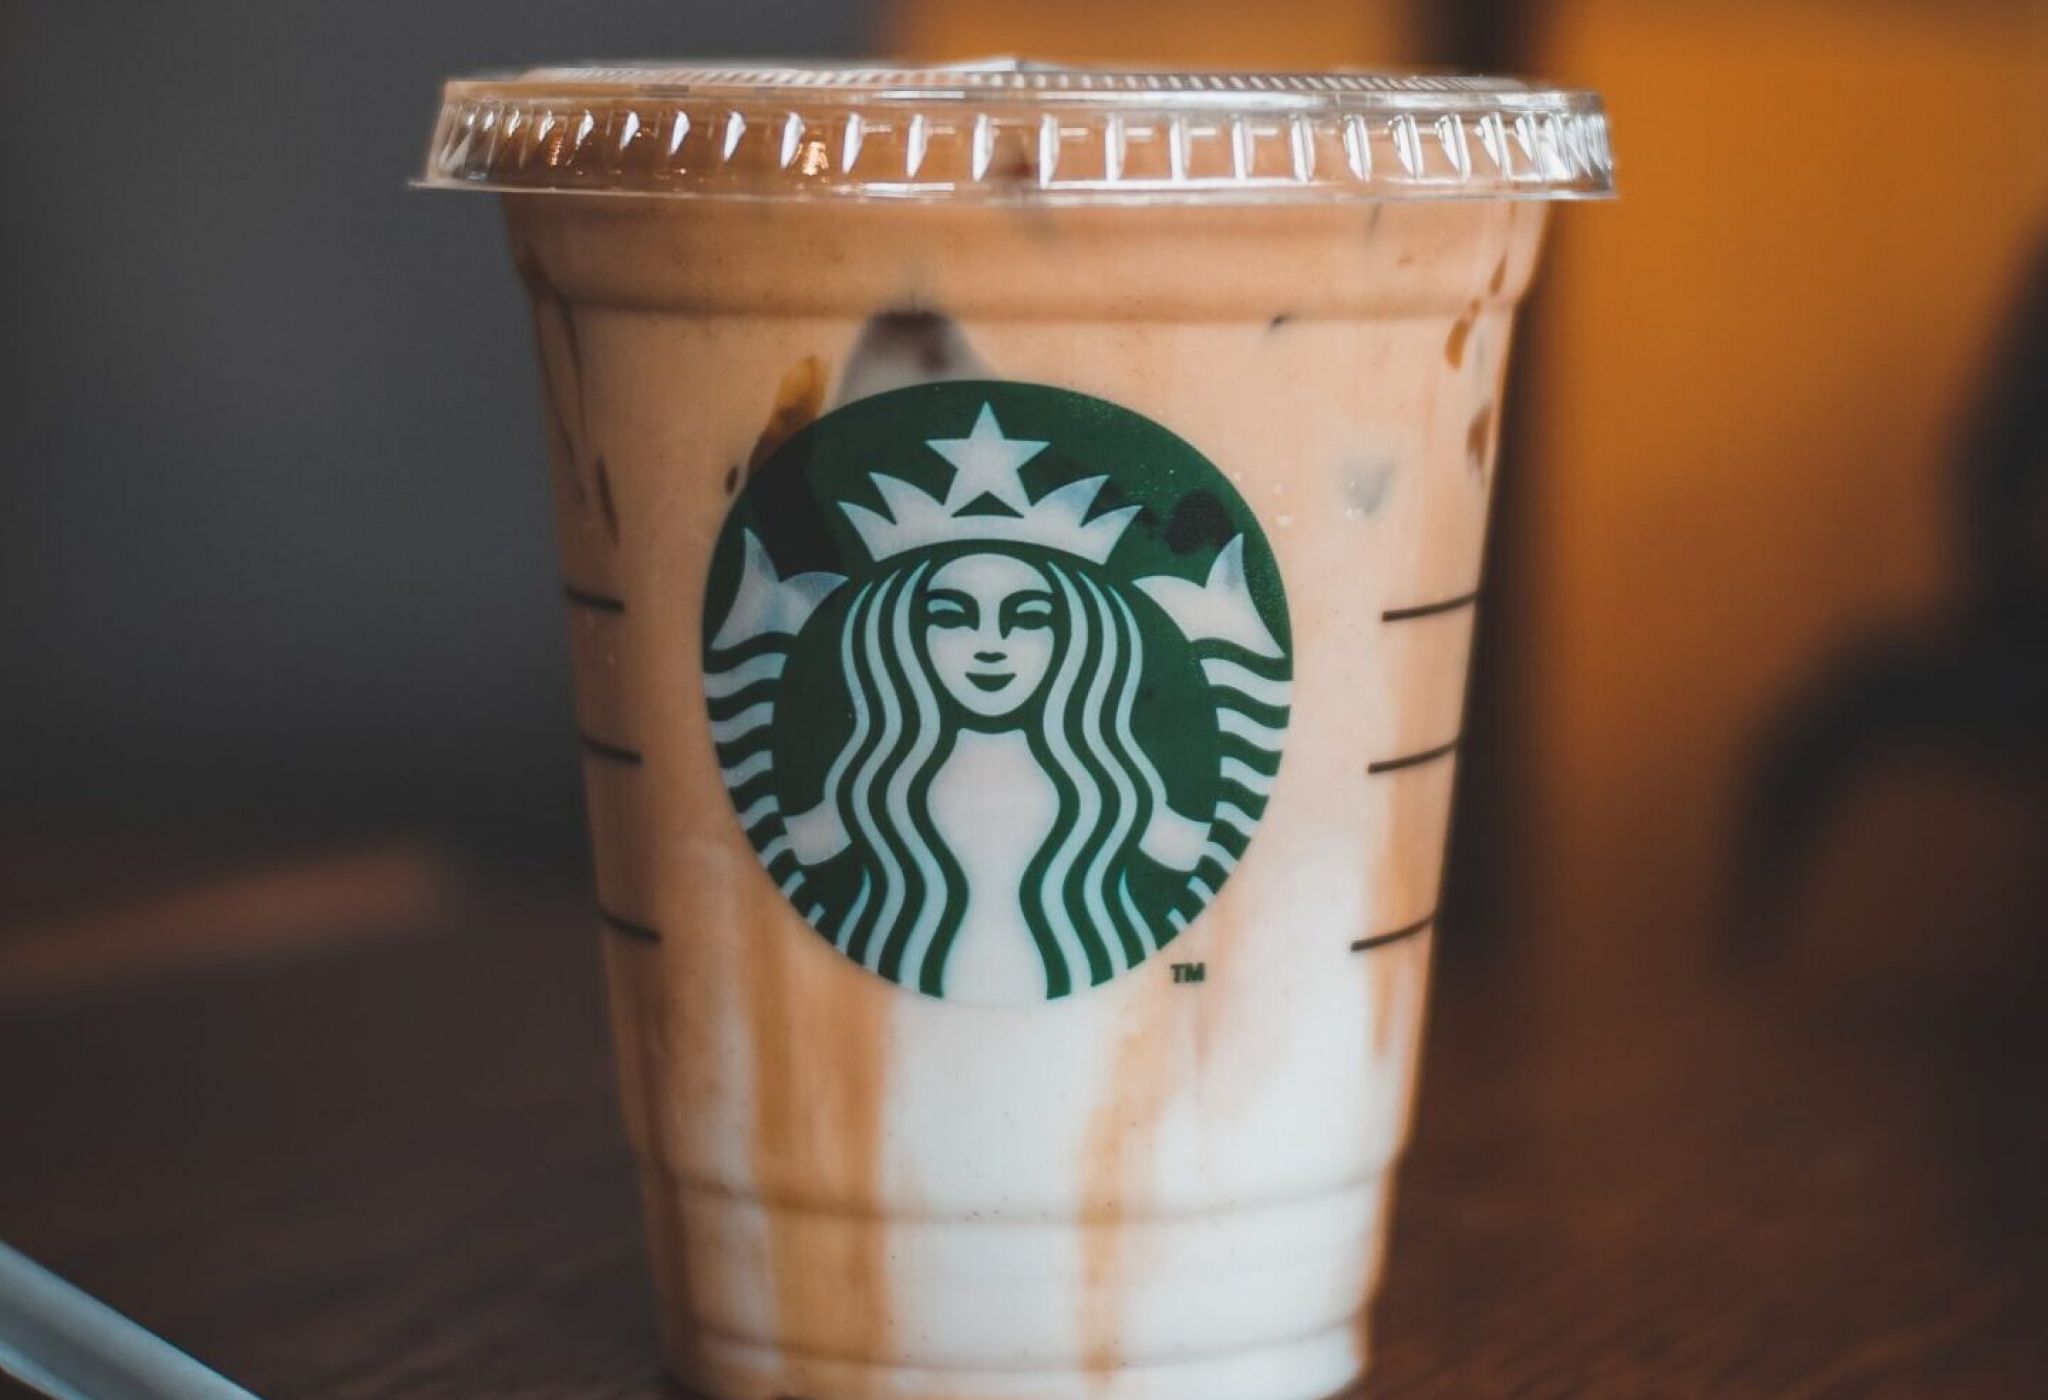 Starbucks cup with cold drink inside